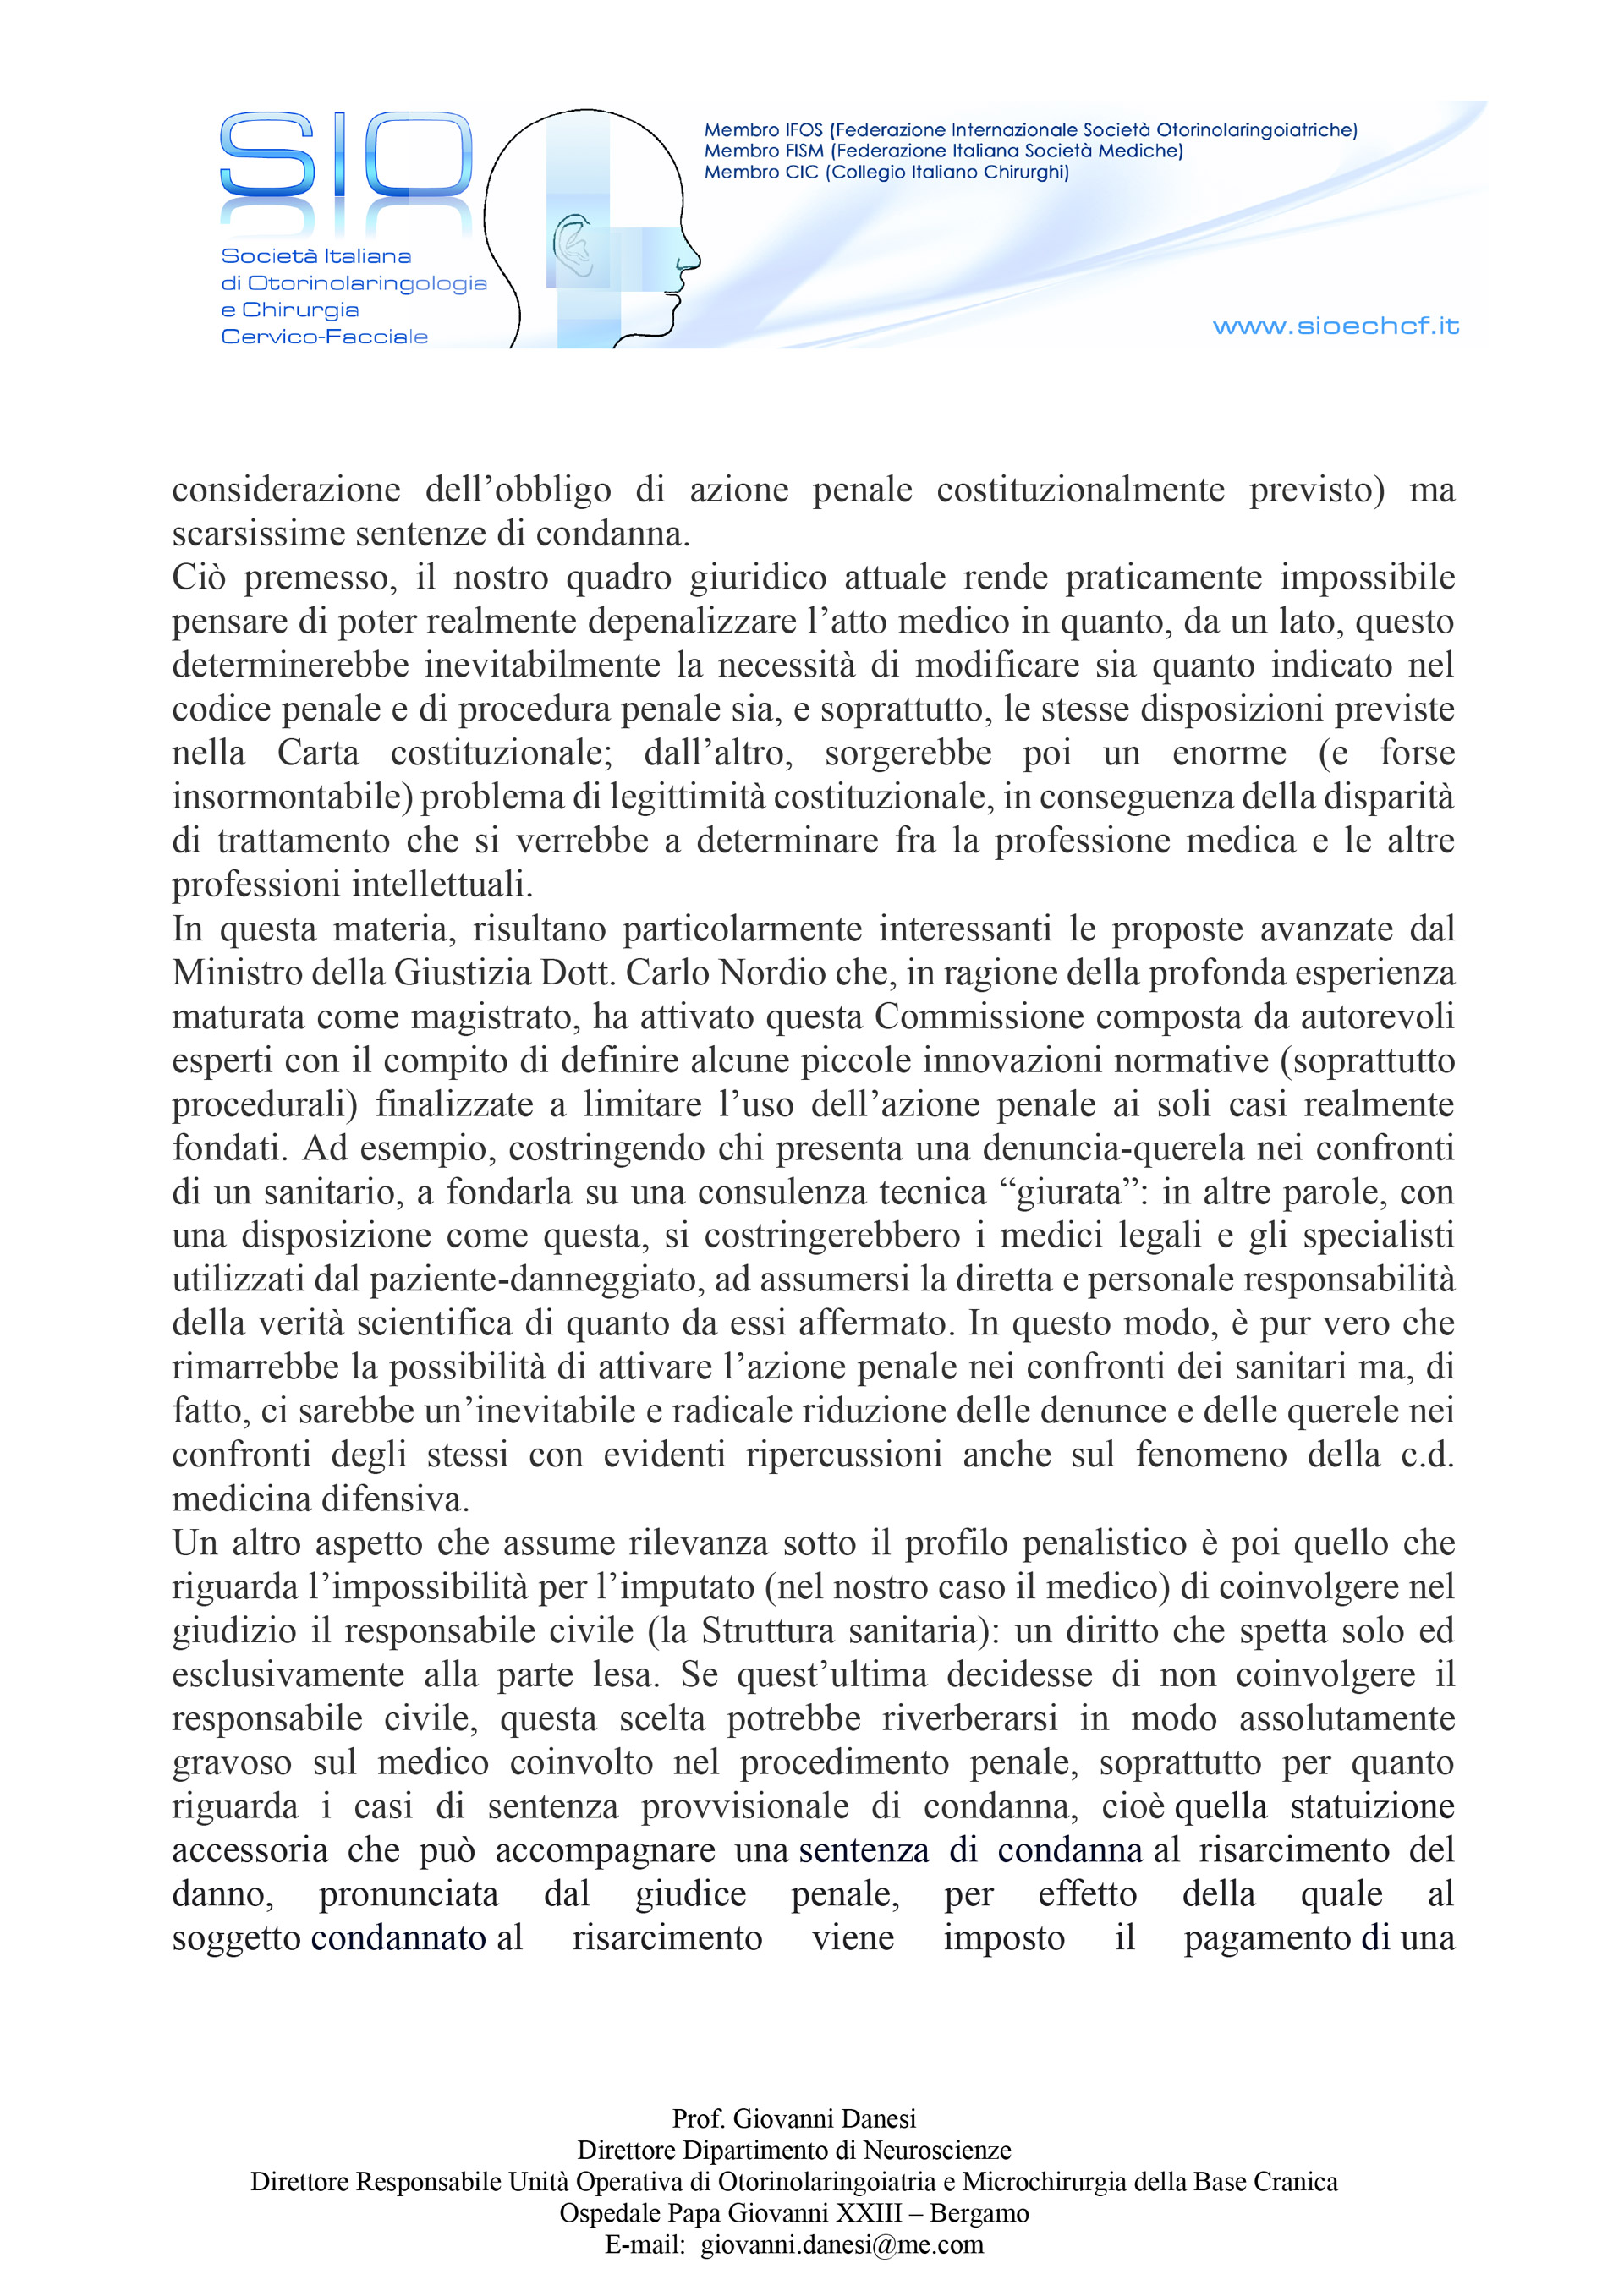 LetteraSIOperCIC-3